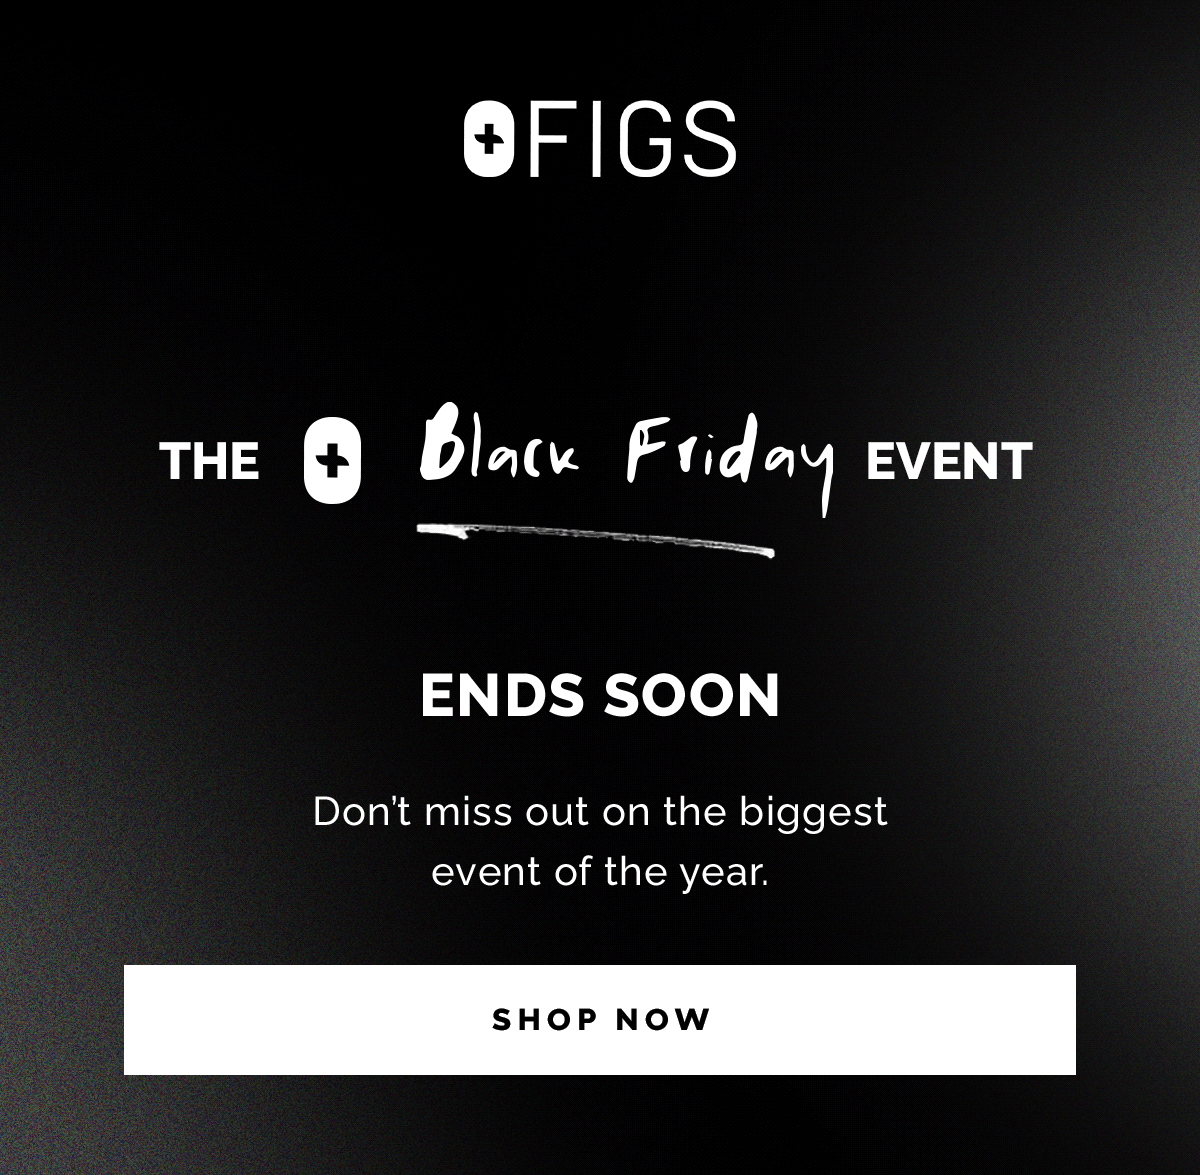 The Black Friday Event ends soon!